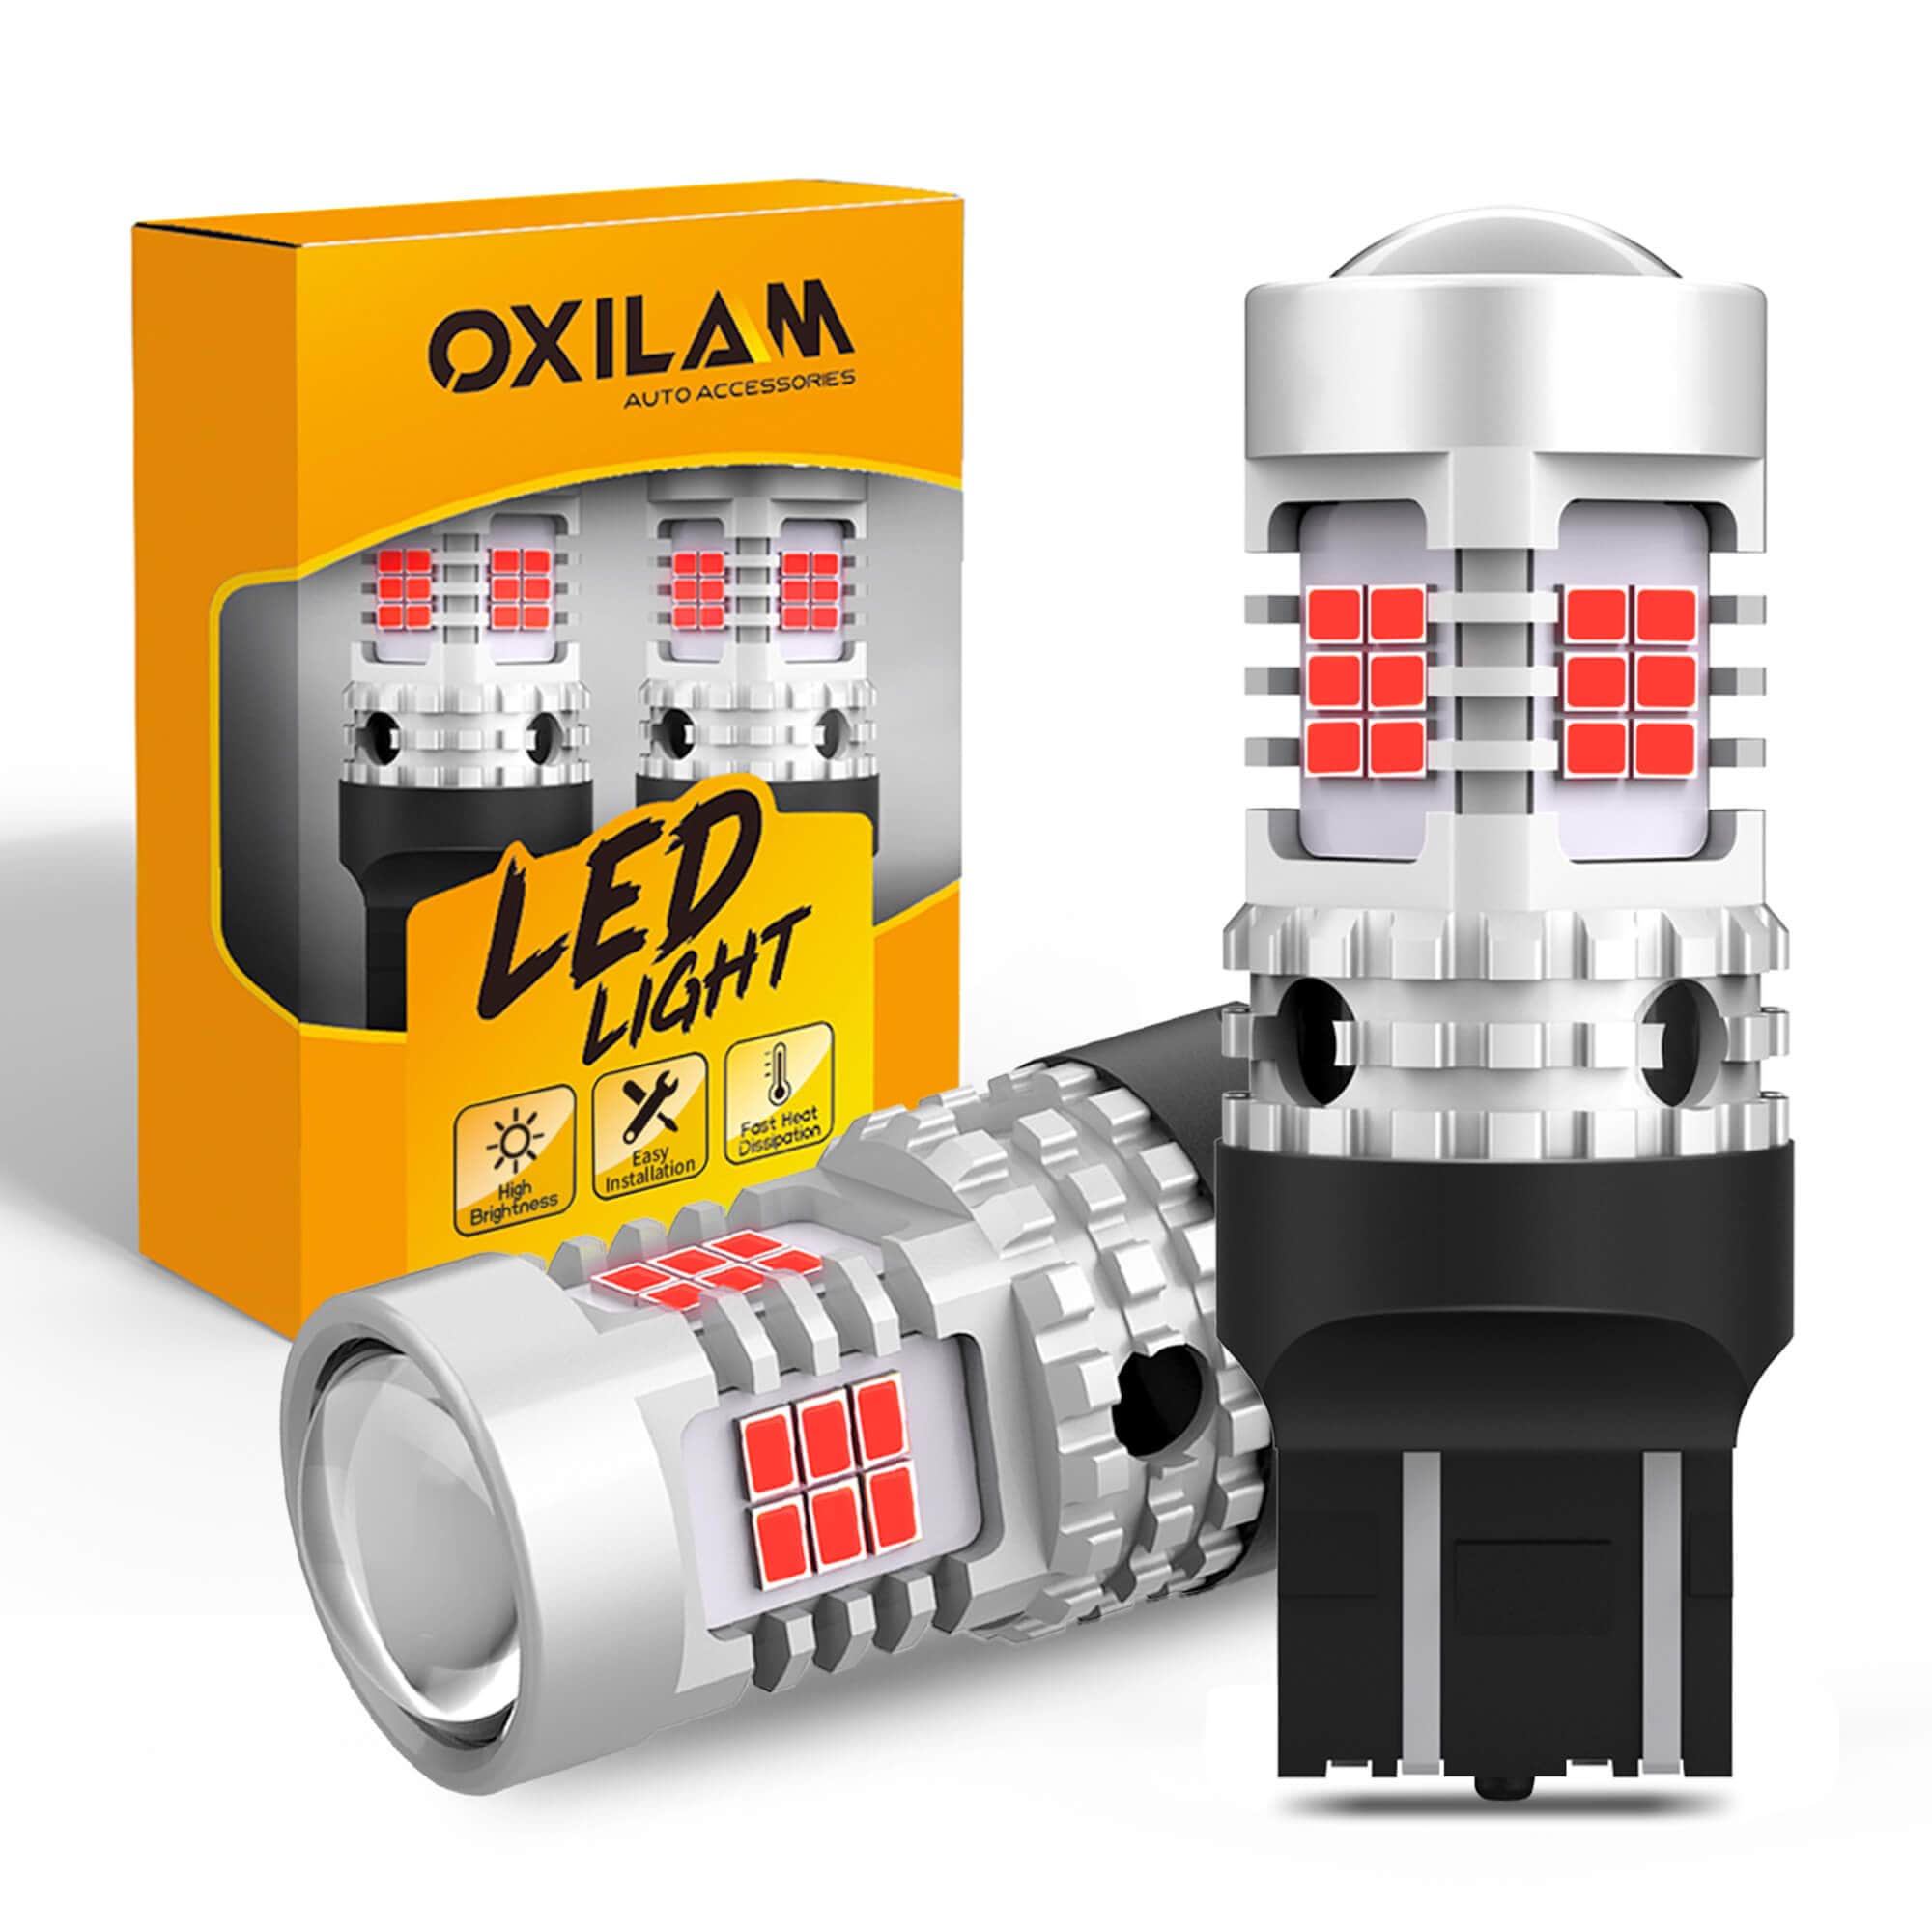 Oxilam Motor Vehicle Lighting 2022 Upgraded 7440 7443 LED Bulbs Red Brake Lights, 4000LM 600% Brighter, CANBUS Error Free, OXILAM 7441 7444 T20 W21W LED Lamps Replacement with Projector for Tail Turn Signal Stop Lights (Pack of 2)